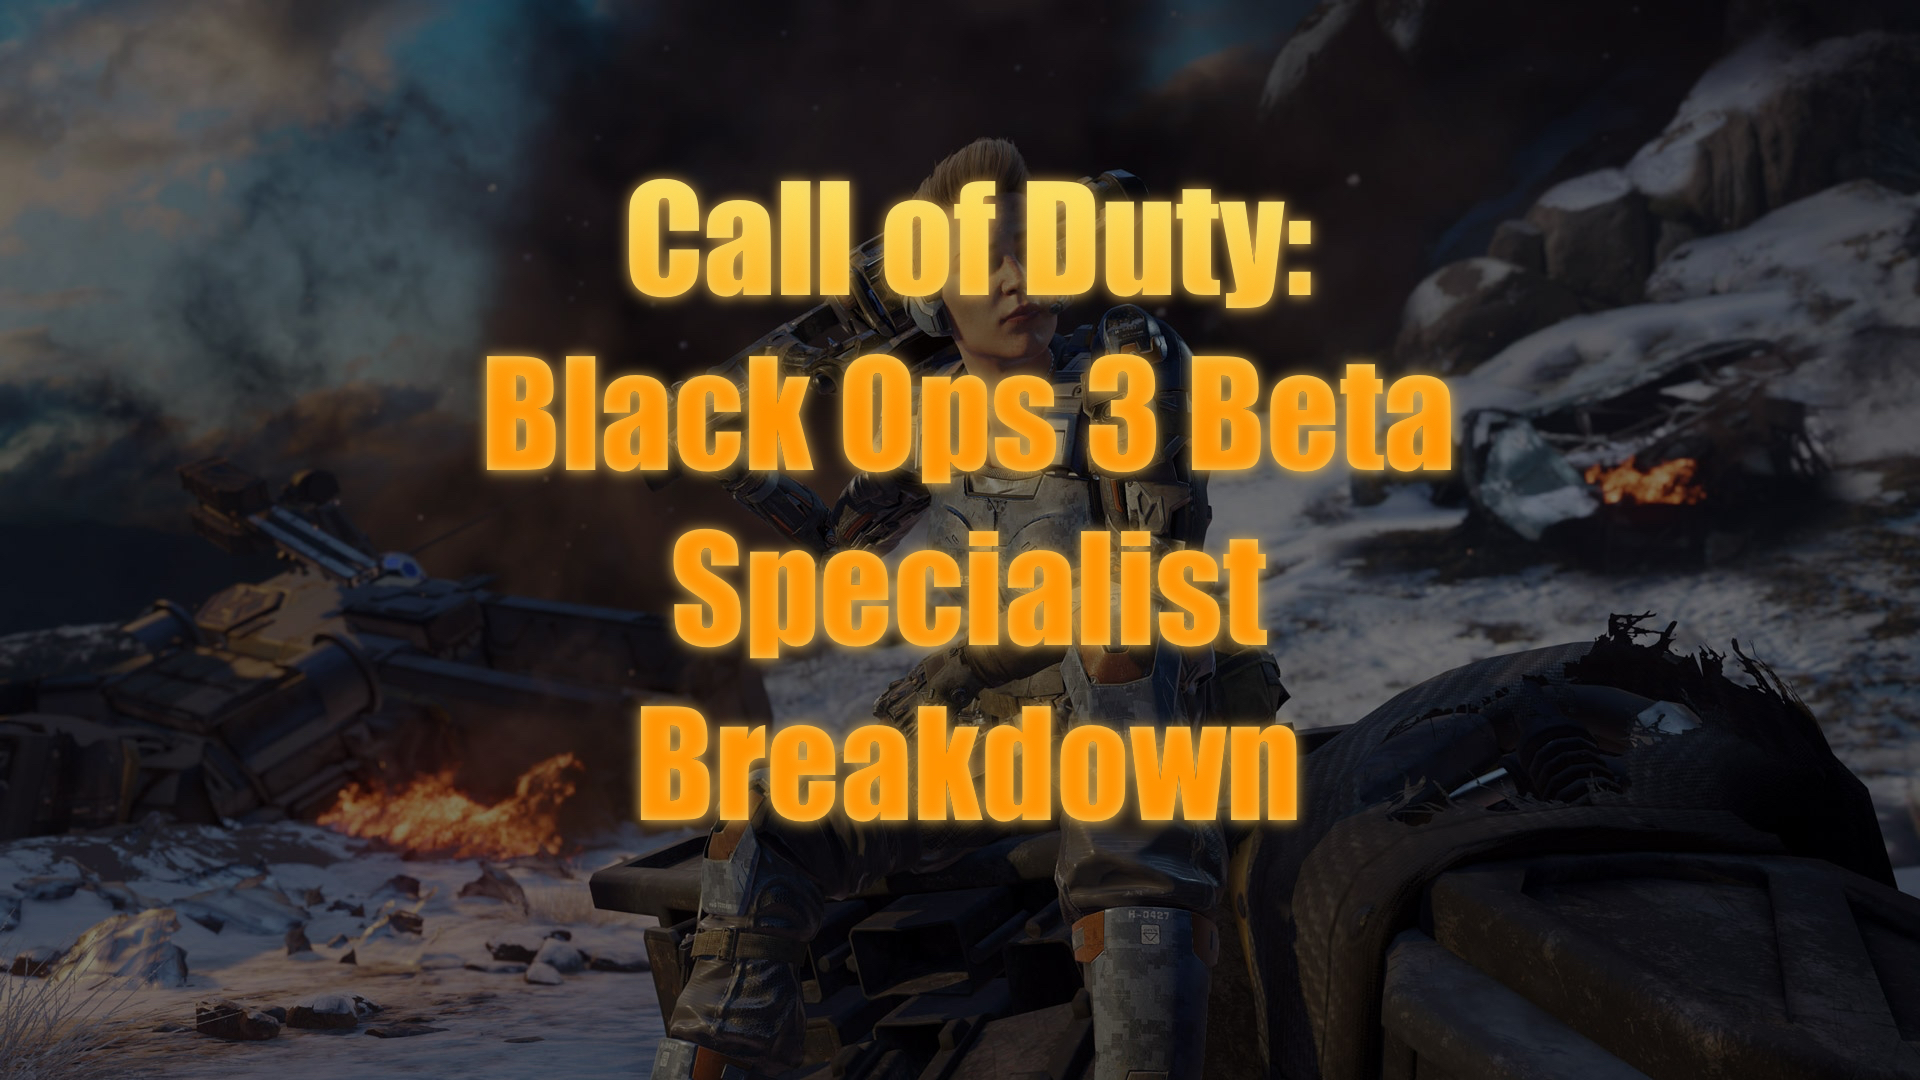 What you need to know about Call of Duty: Black Ops 3 beta specialists.